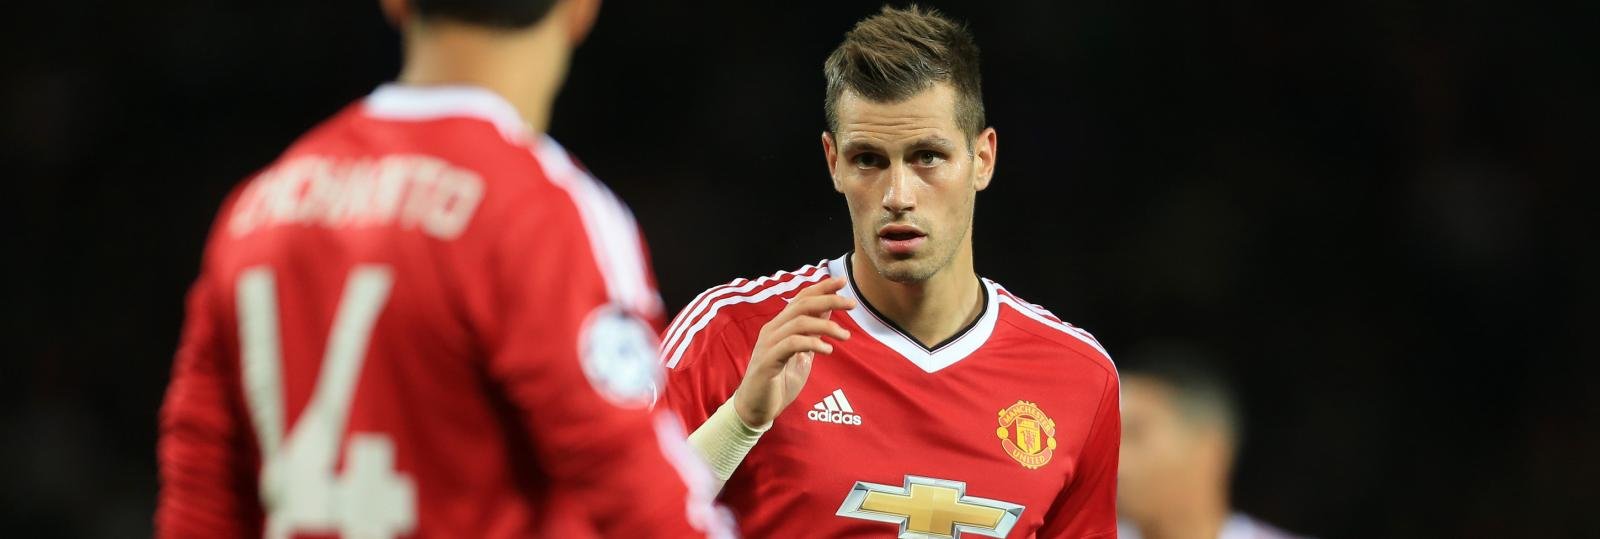 Manchester United open to offloading last summer’s £24m addition after disappointing year